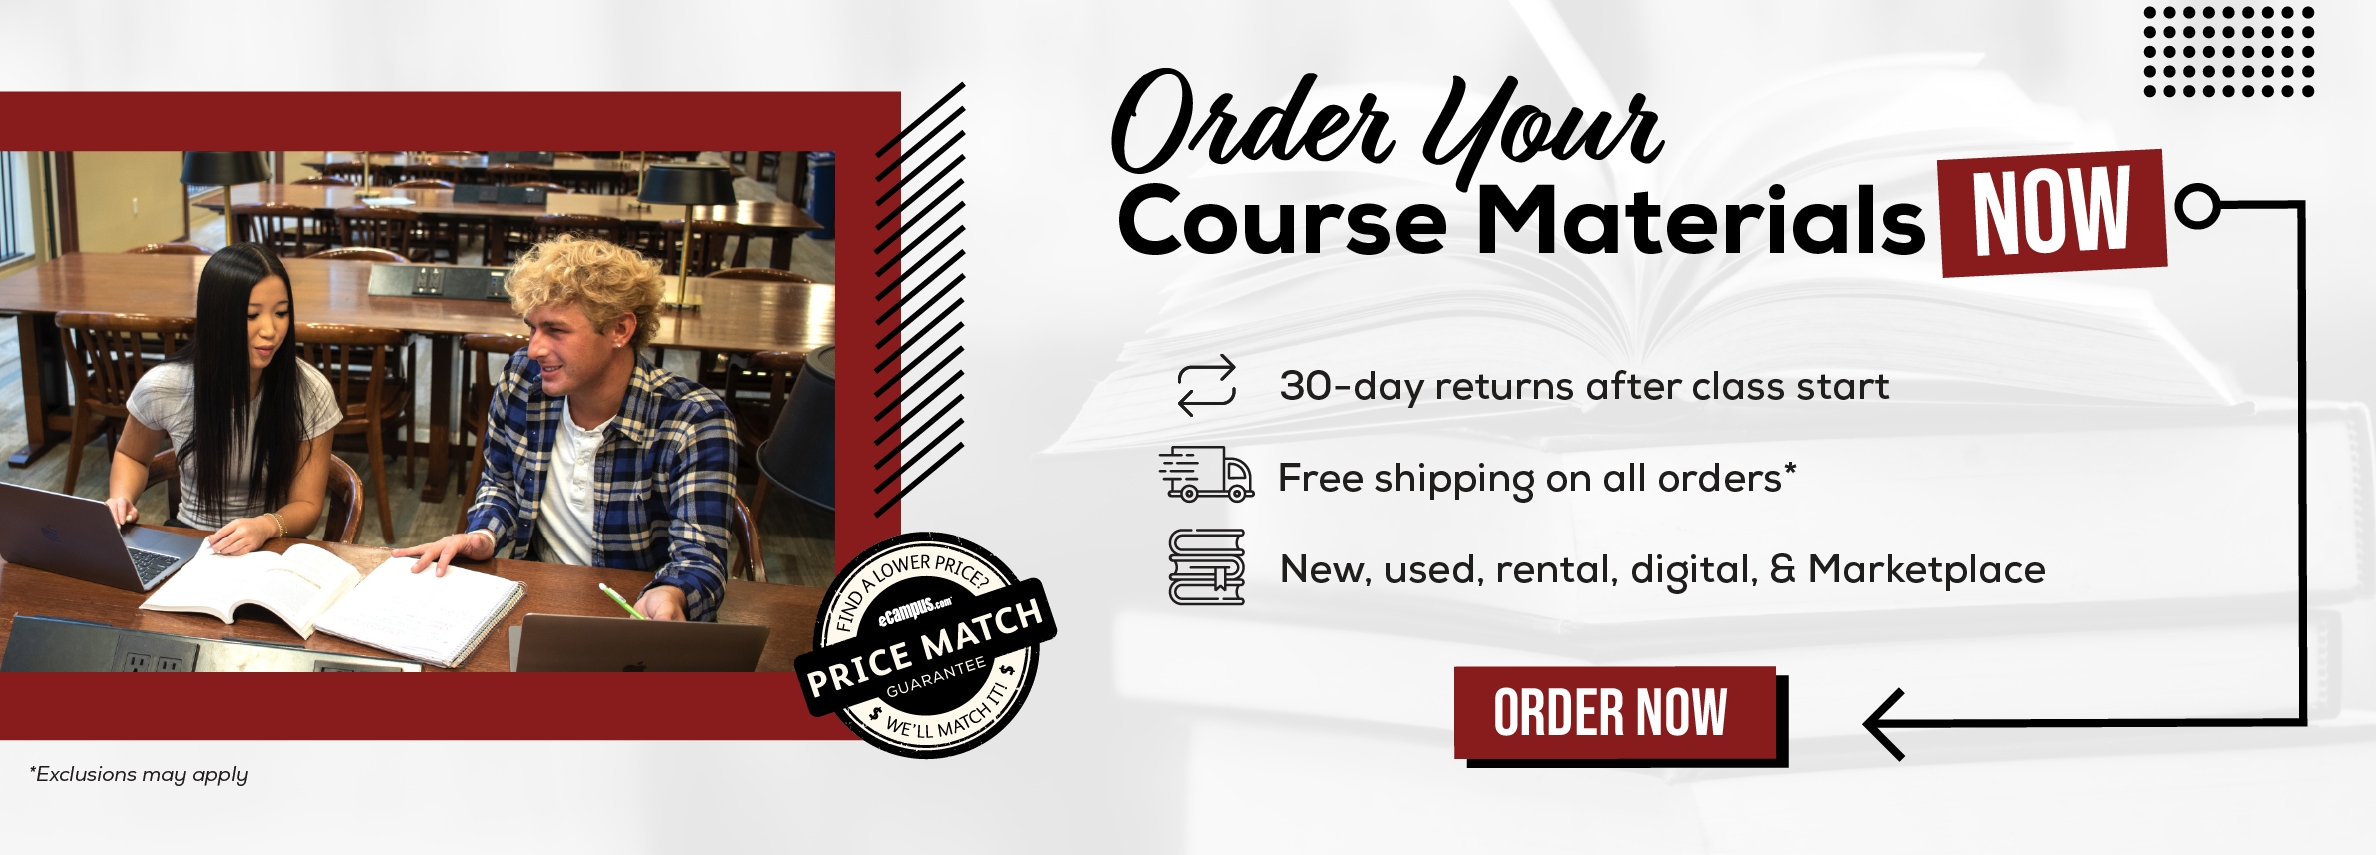 Order Your Course Materials Now. 30-day returns after class start. Free shipping on all orders*. New, used, rental, digital, & Marketplace. Order now. *Exclusions may apply. (new tab)